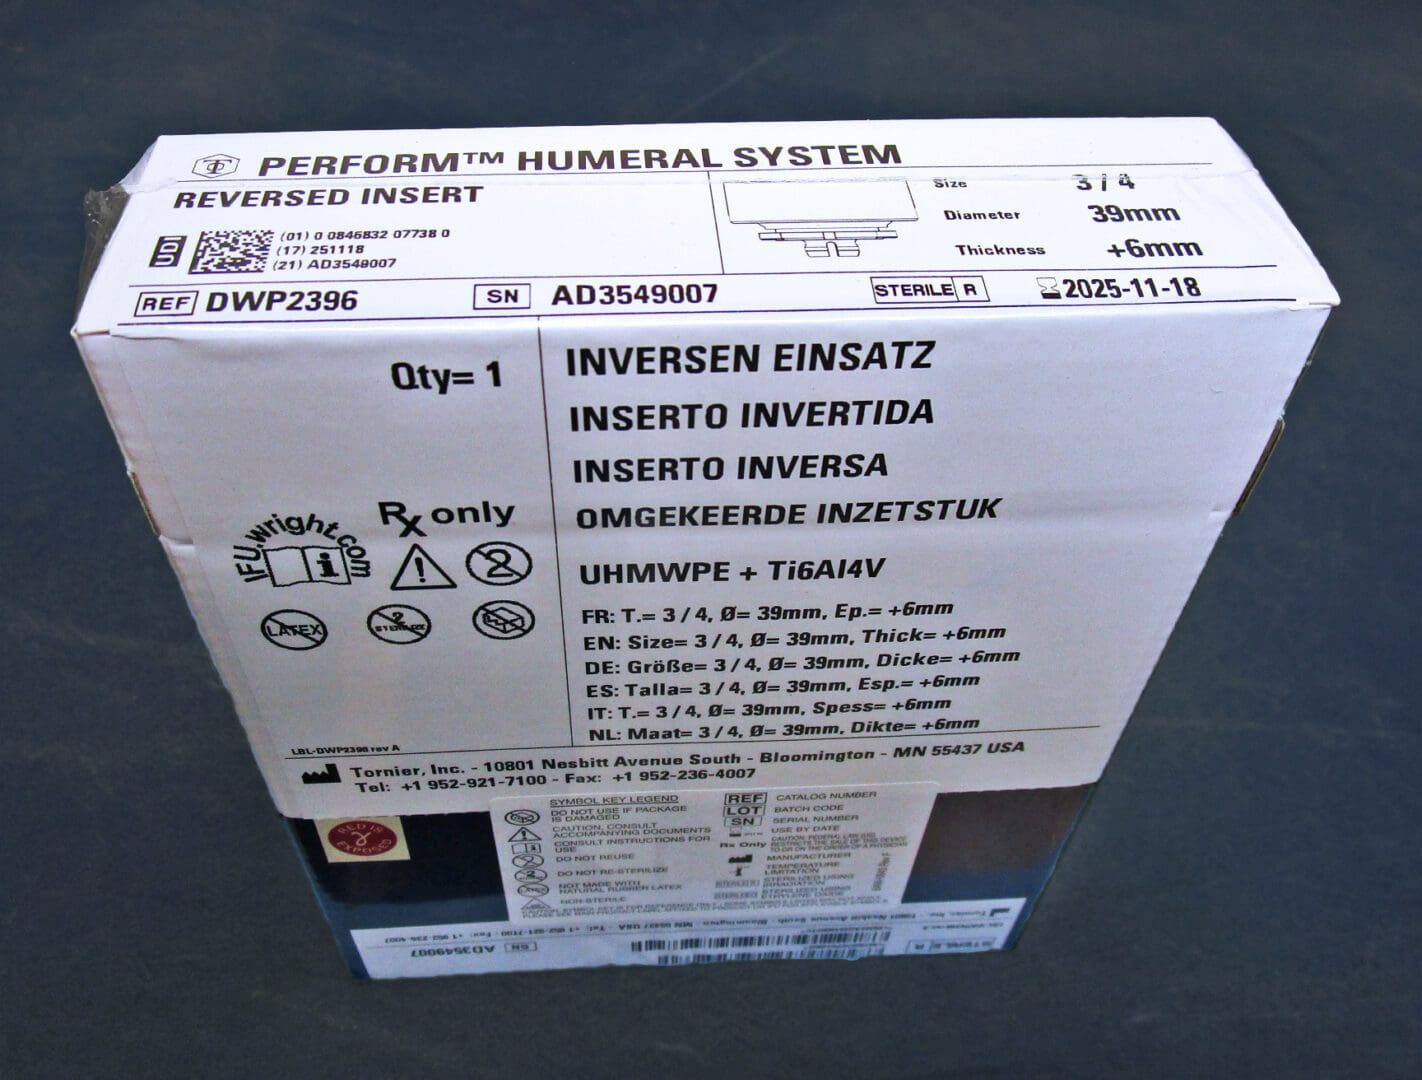 A box of instructions for the perform numeral system.